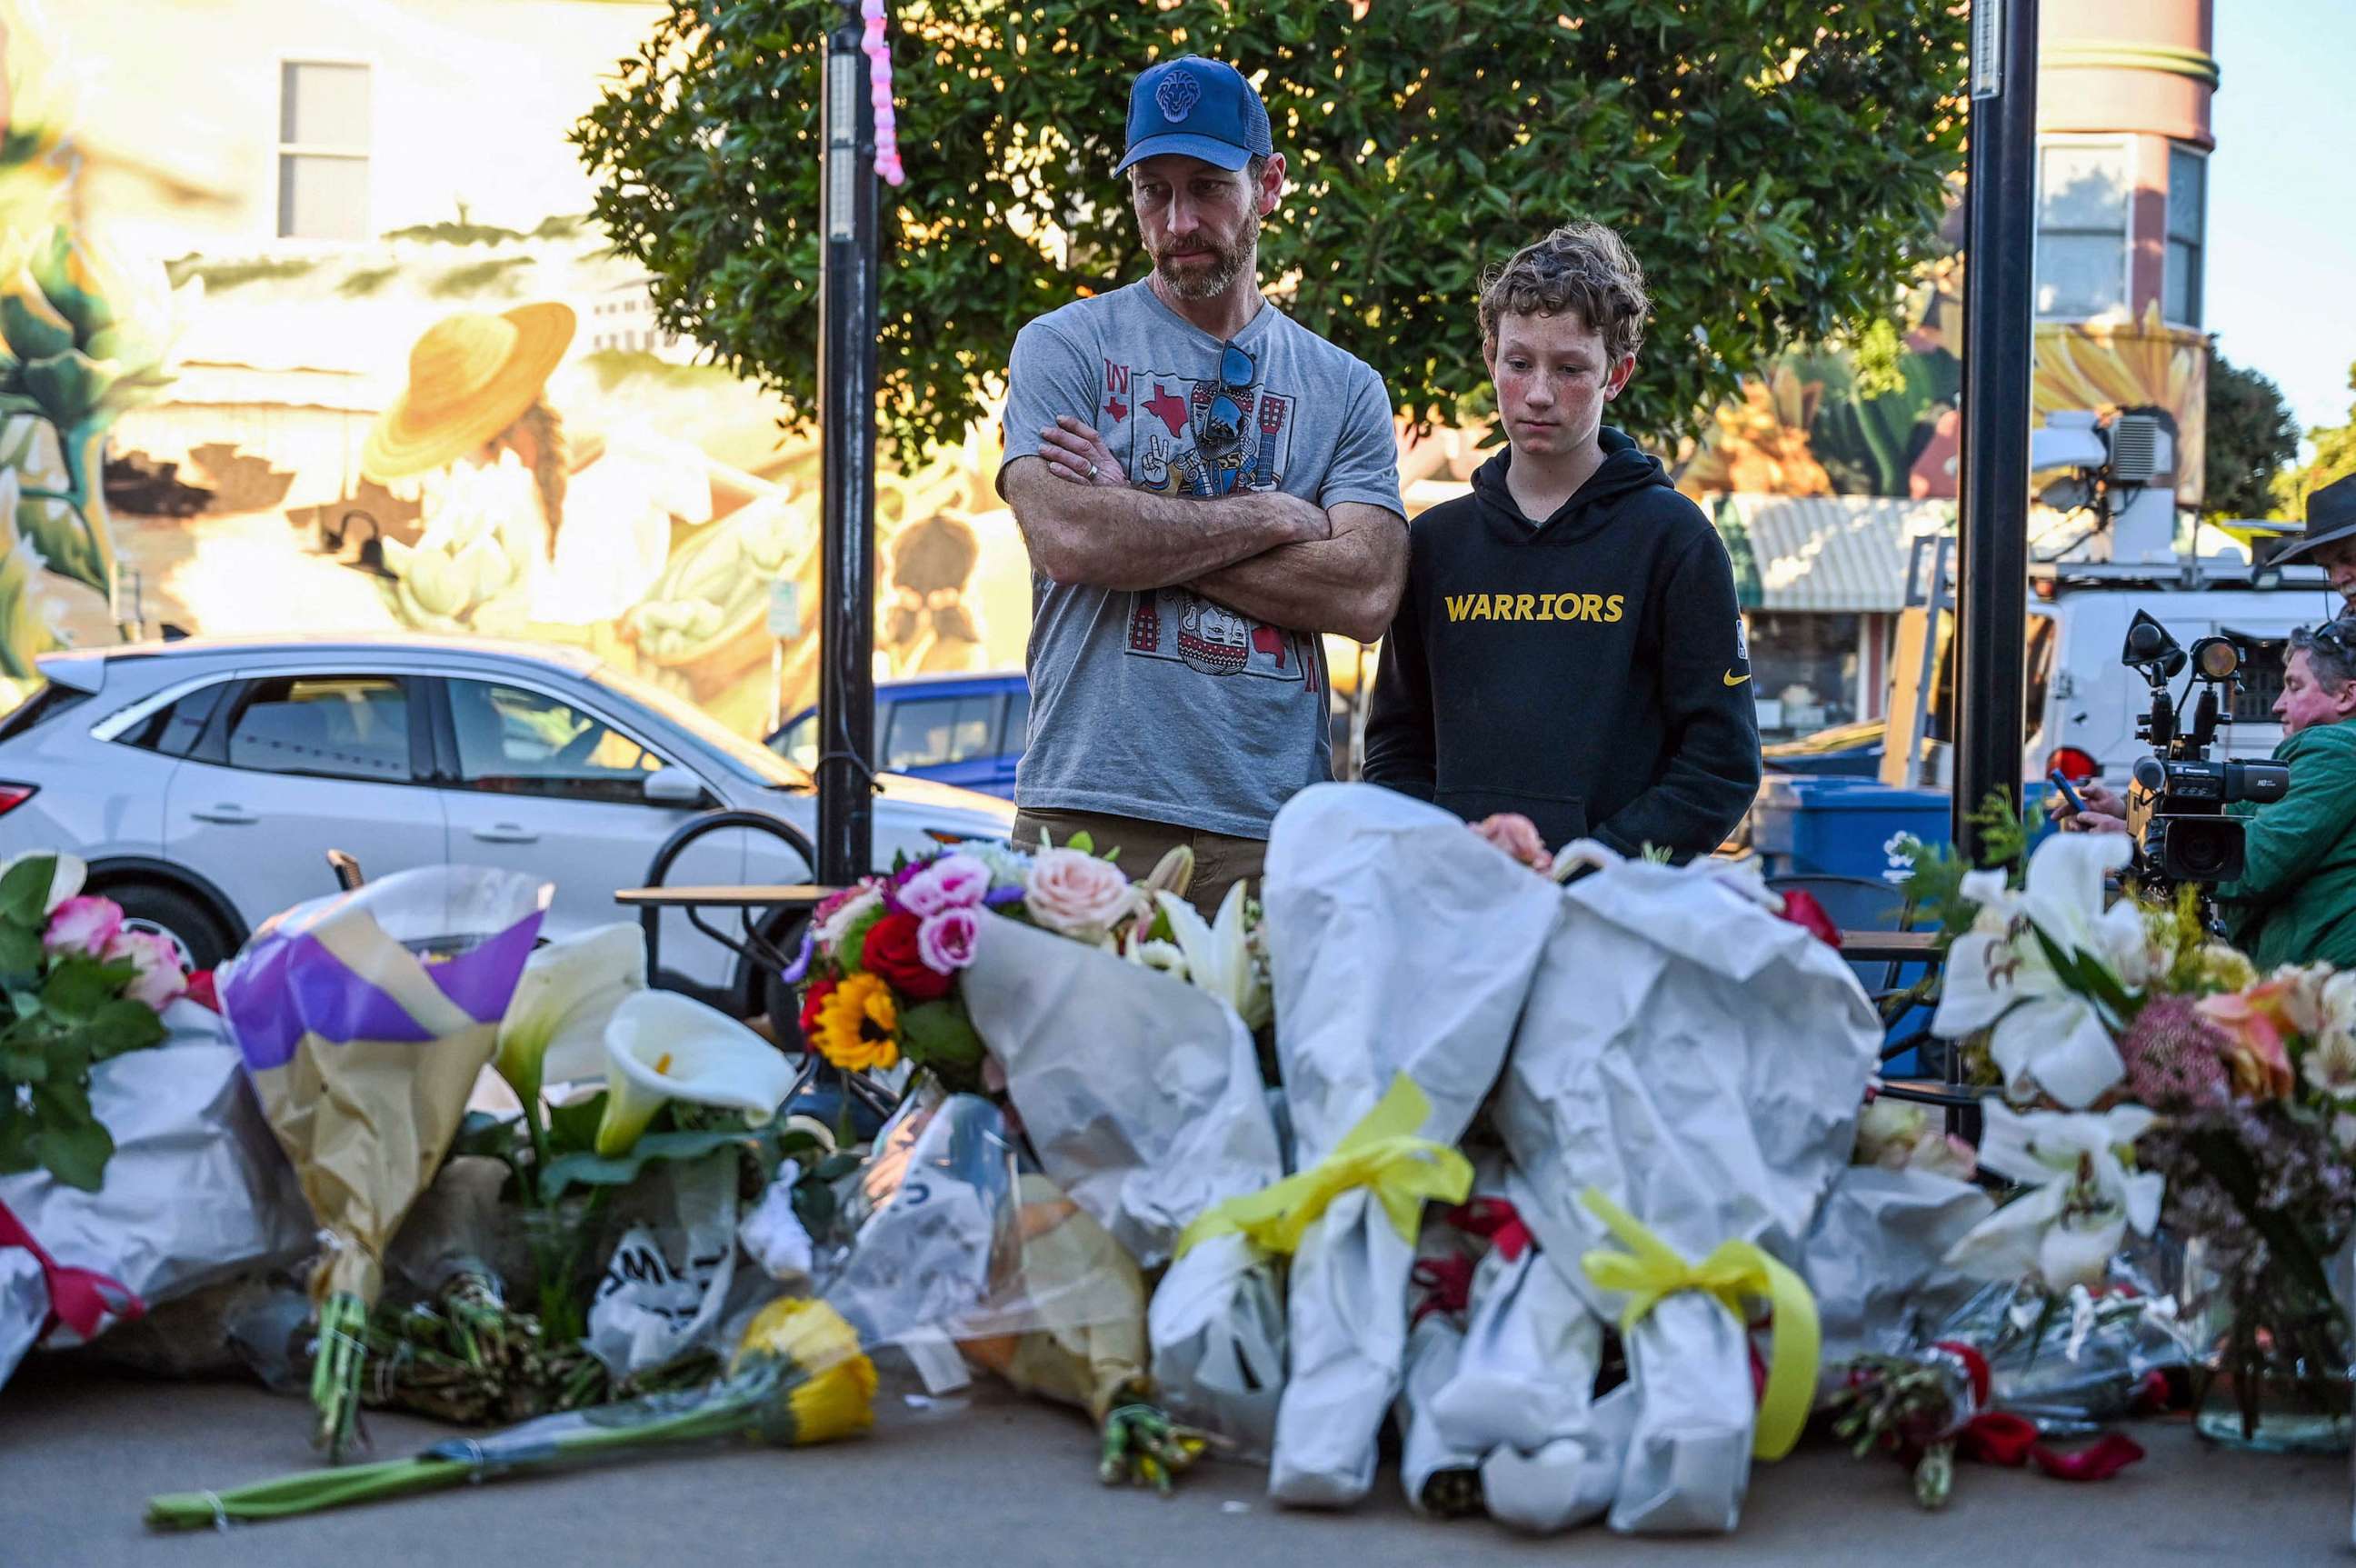 PHOTO: Matt Jones and his son Ryder Jones pay their respects at a makeshift memorial for those killed during a shooting in Half Moon Bay, Calif., Jan. 25, 2023.